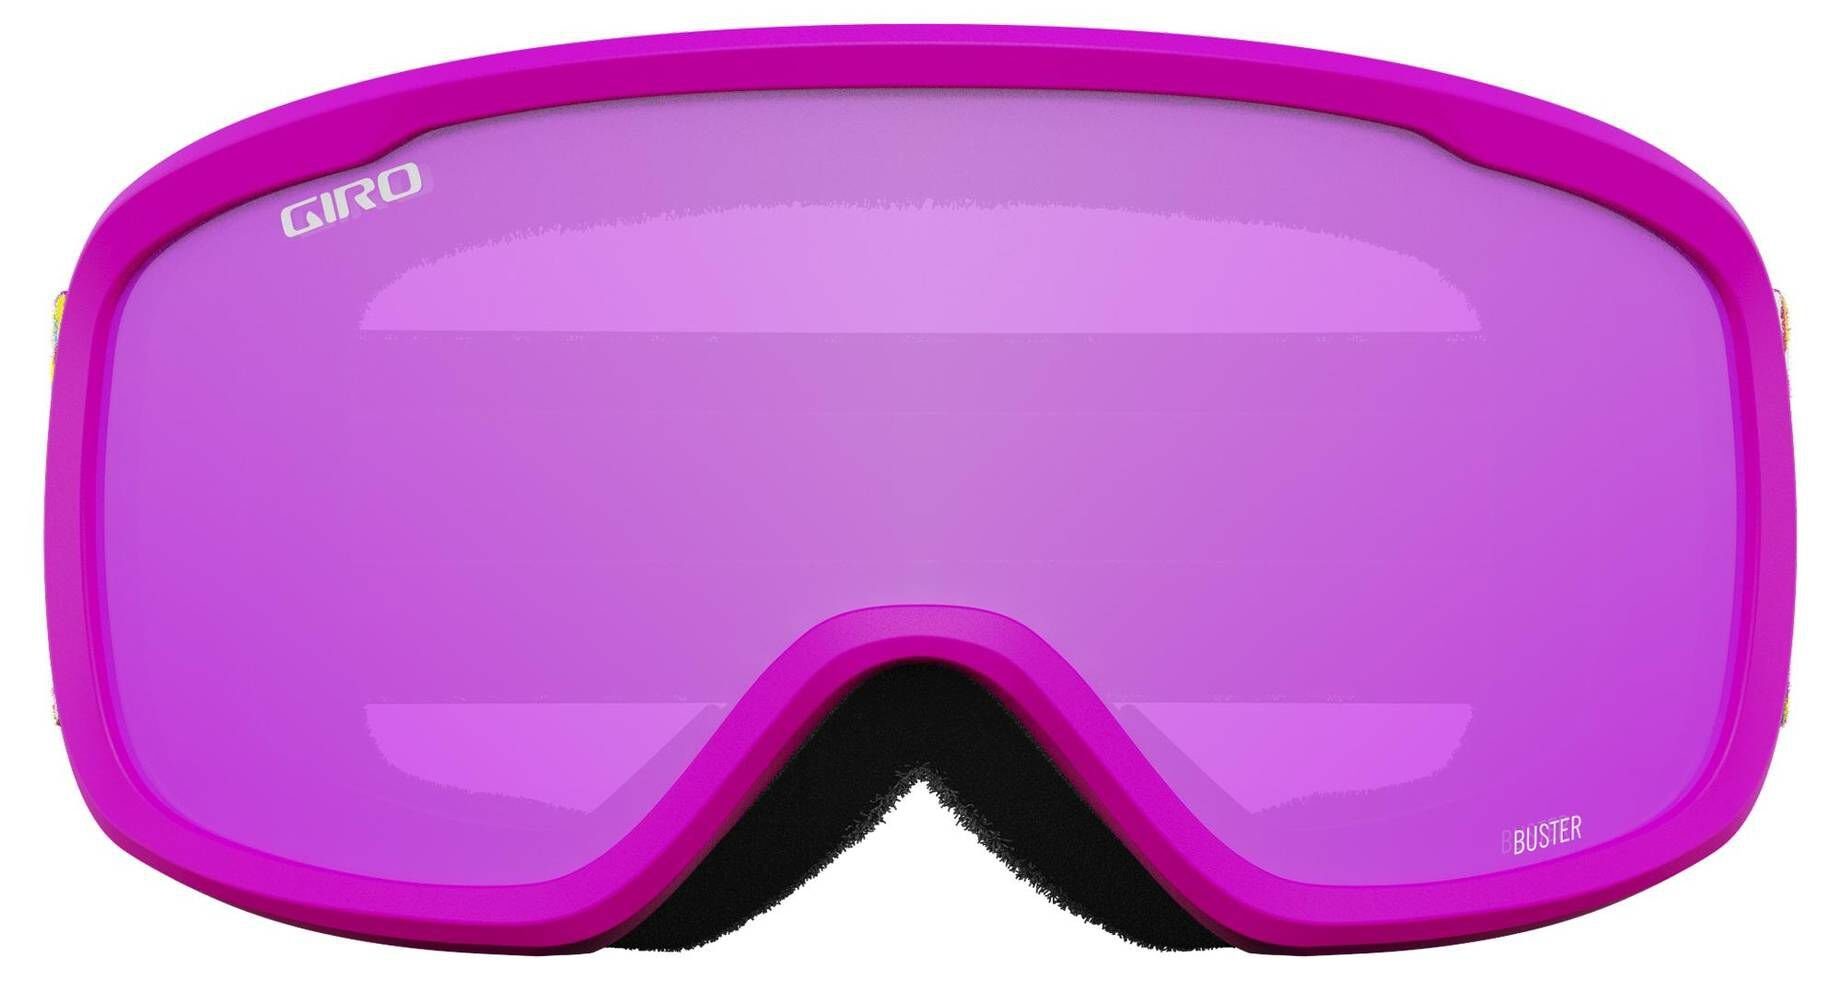 Giro Skibrille SNOW GOGGLE BUSTER (101) wollweiss Kinder Skibrille